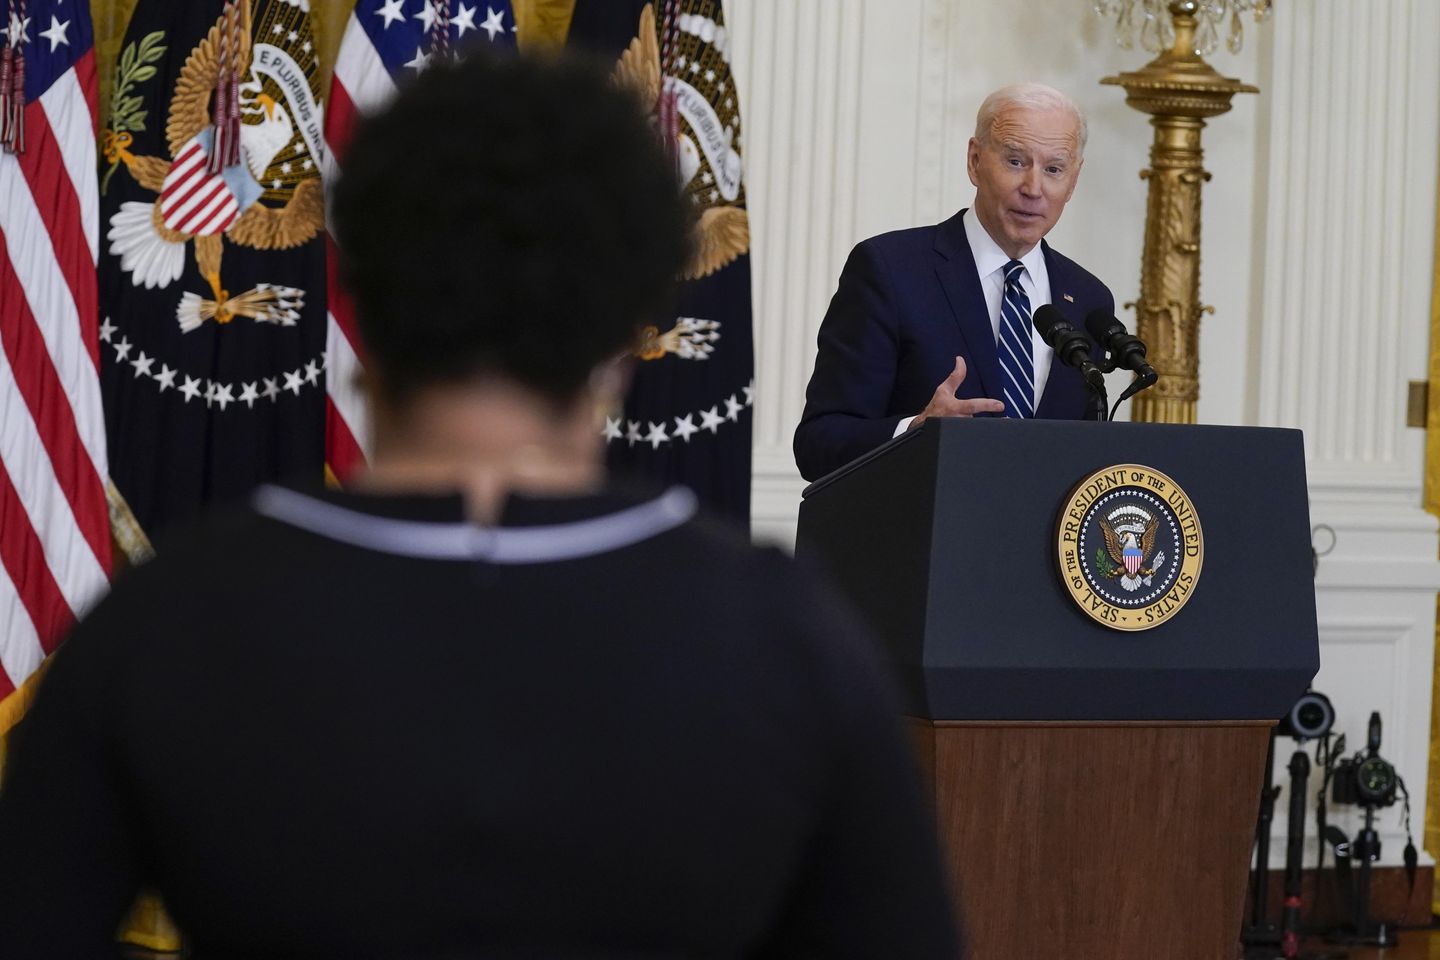 Biden goes nuclear on the filibuster, Republicans but his ploy runs into Democratic resistance